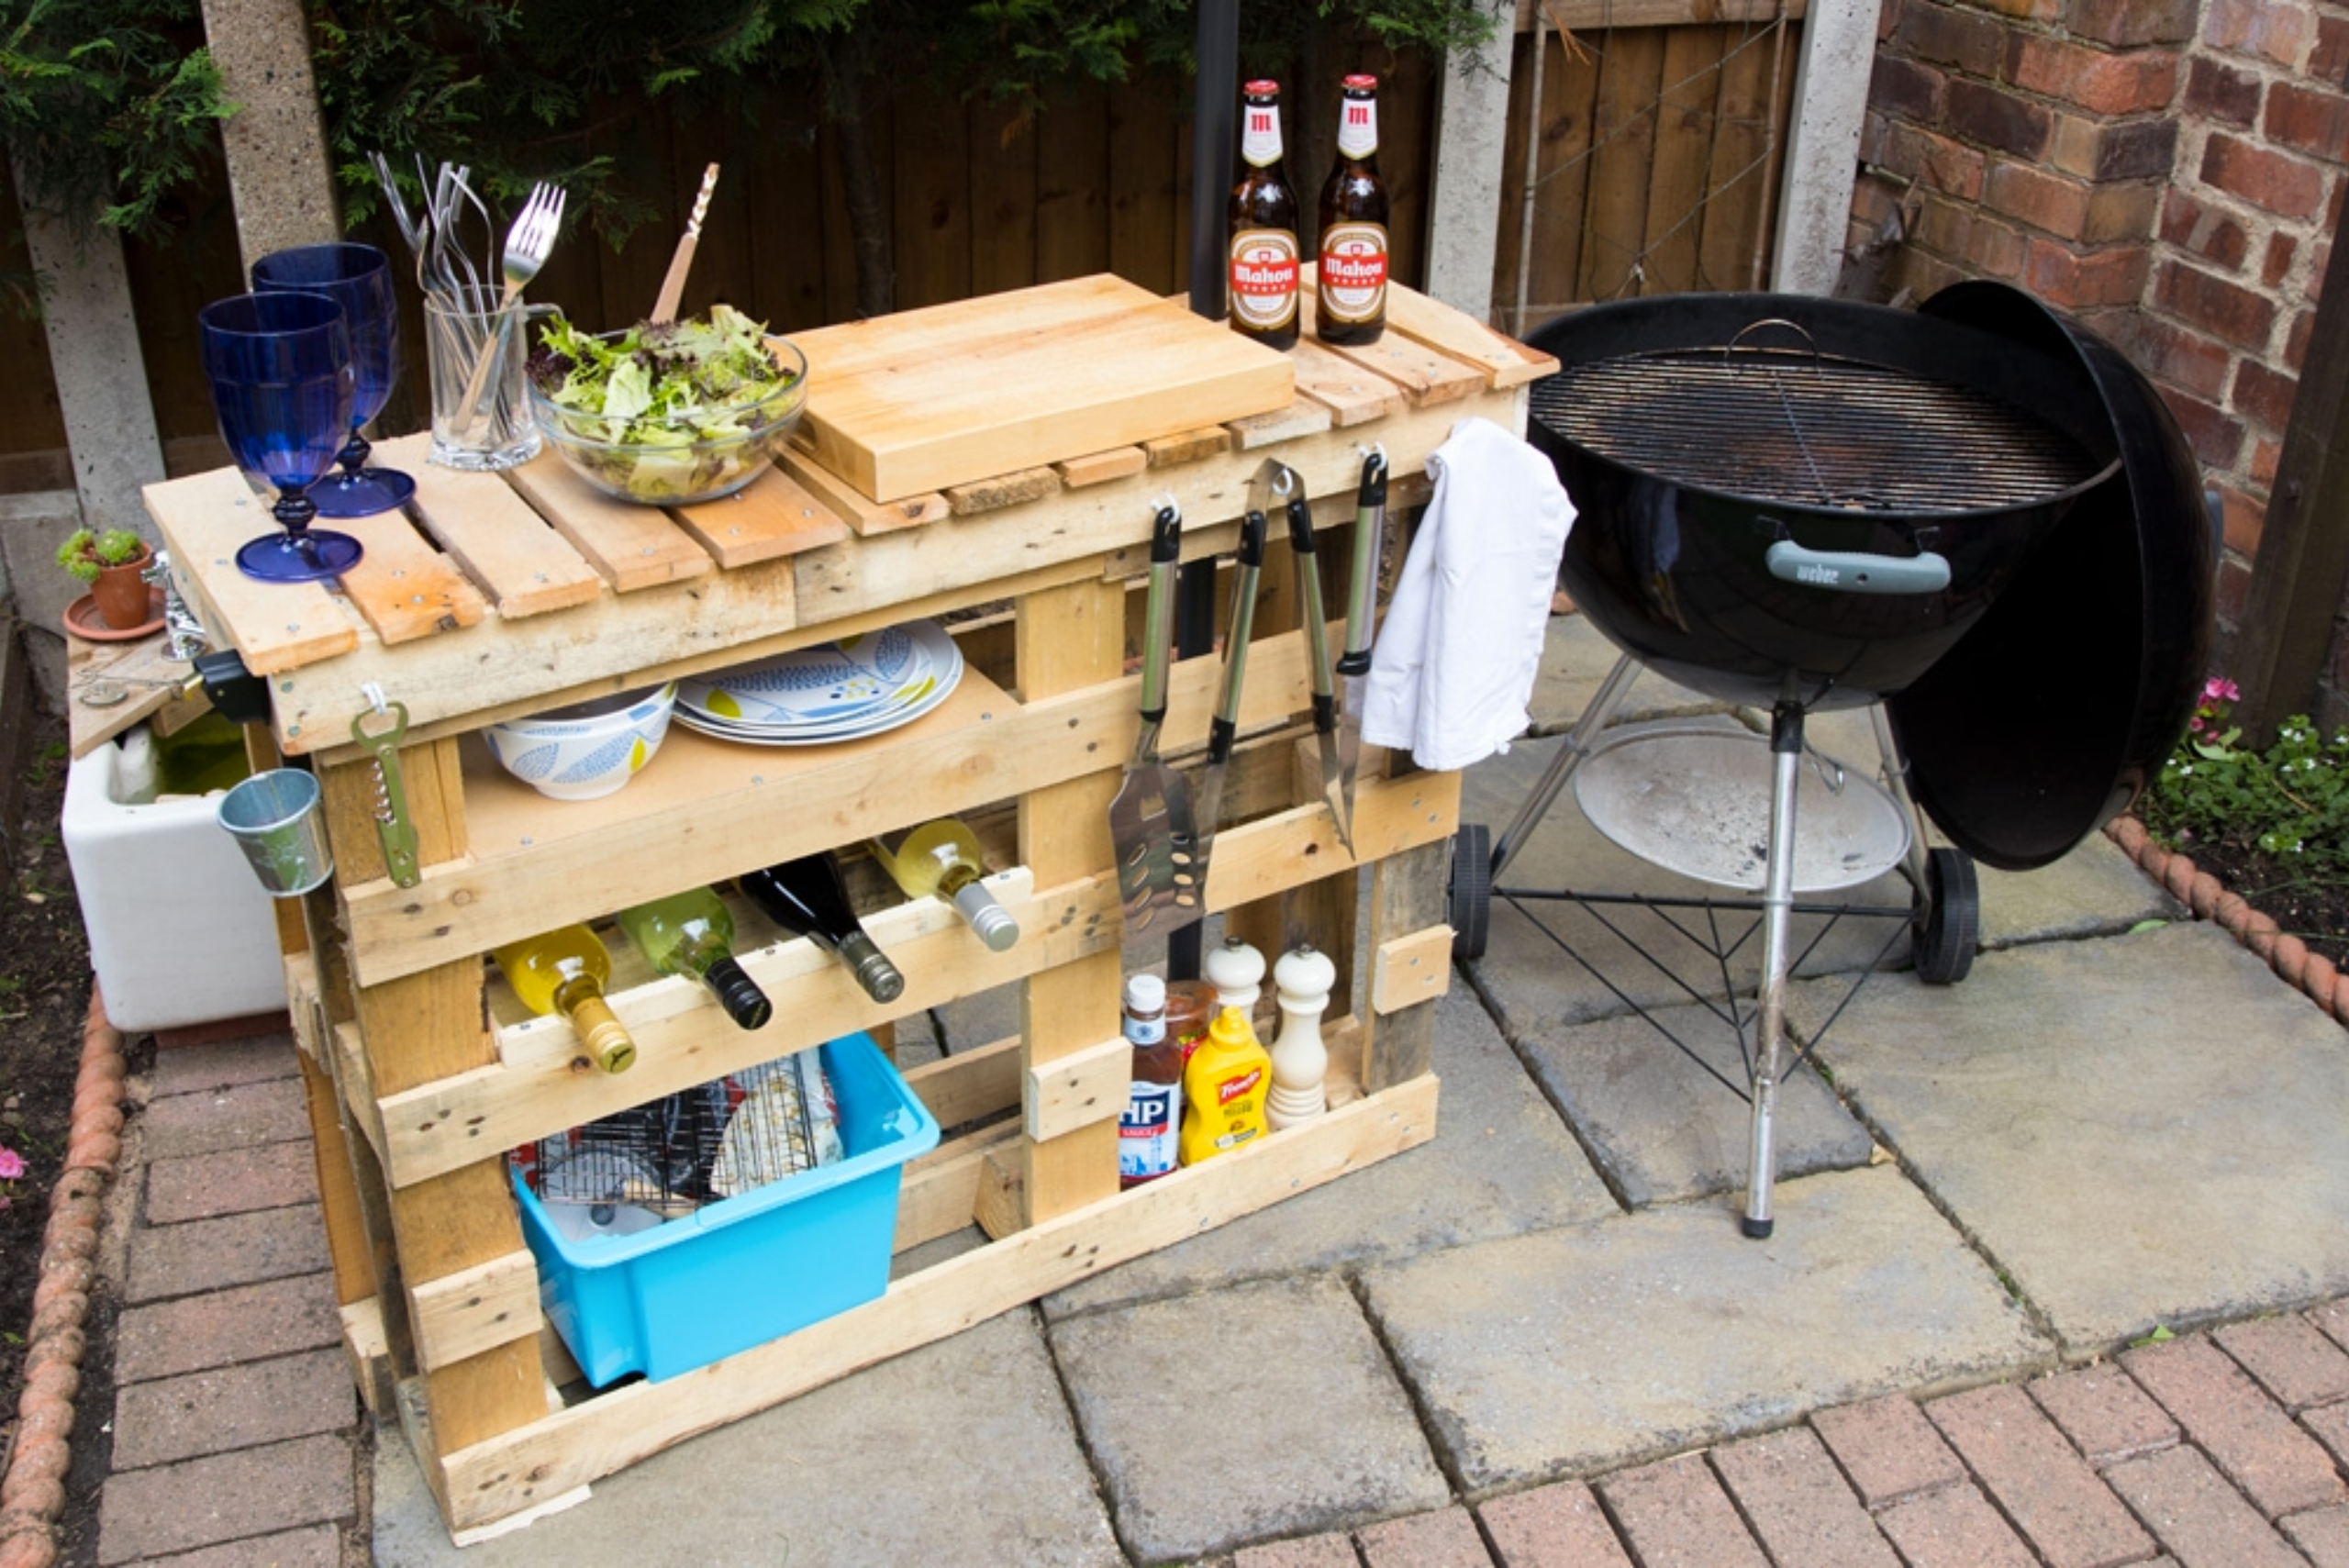 A prep station made of pallets, with a BBQ on the side.